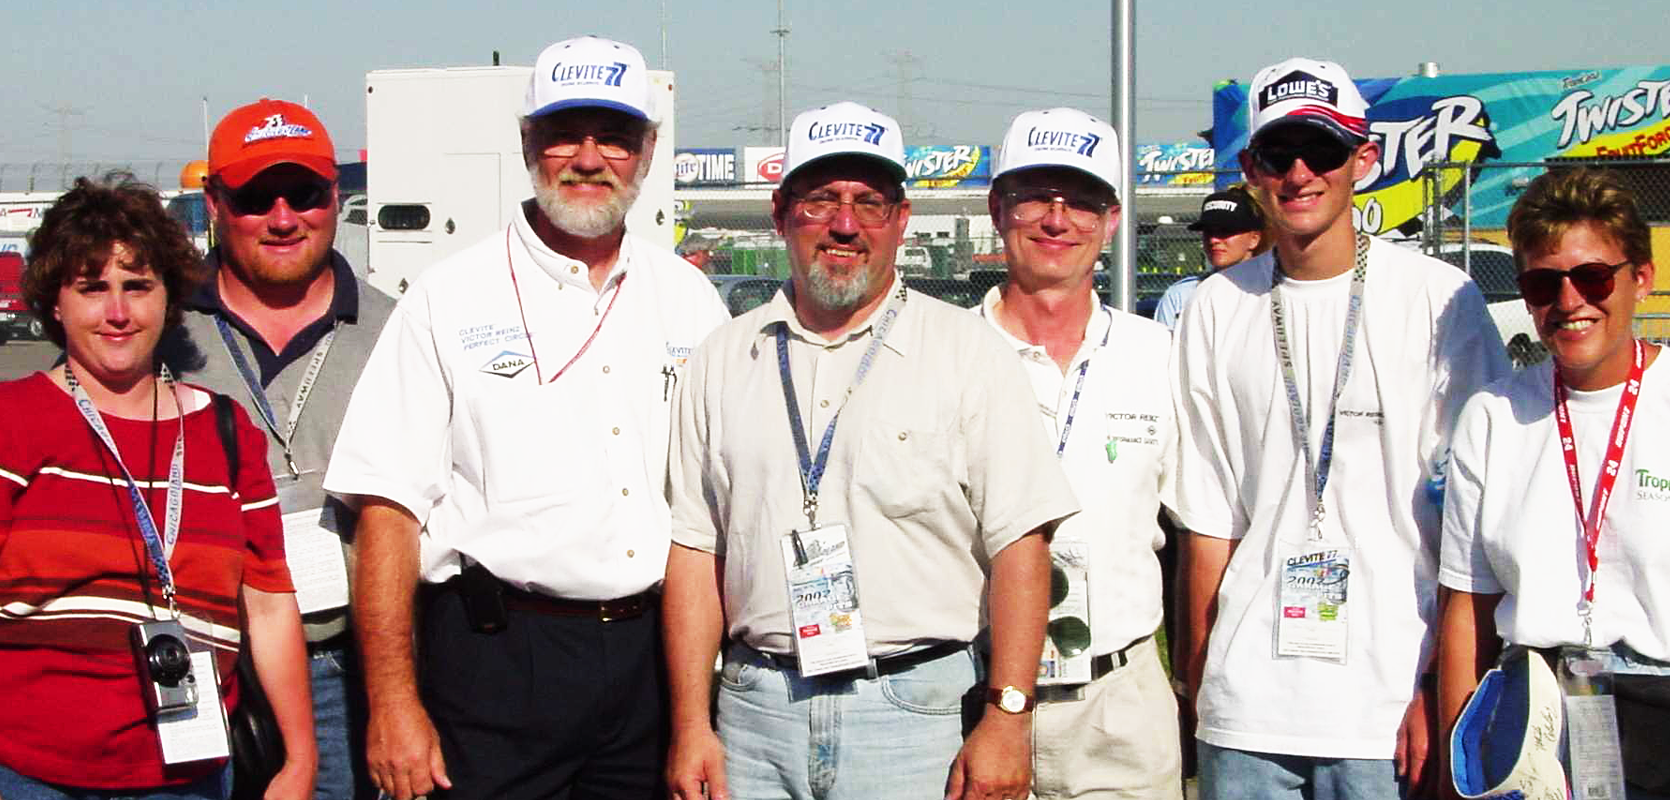 A team from Dana hosted several clients at a Chicagoland Speedway NASCAR race in Joliet, Illinois.